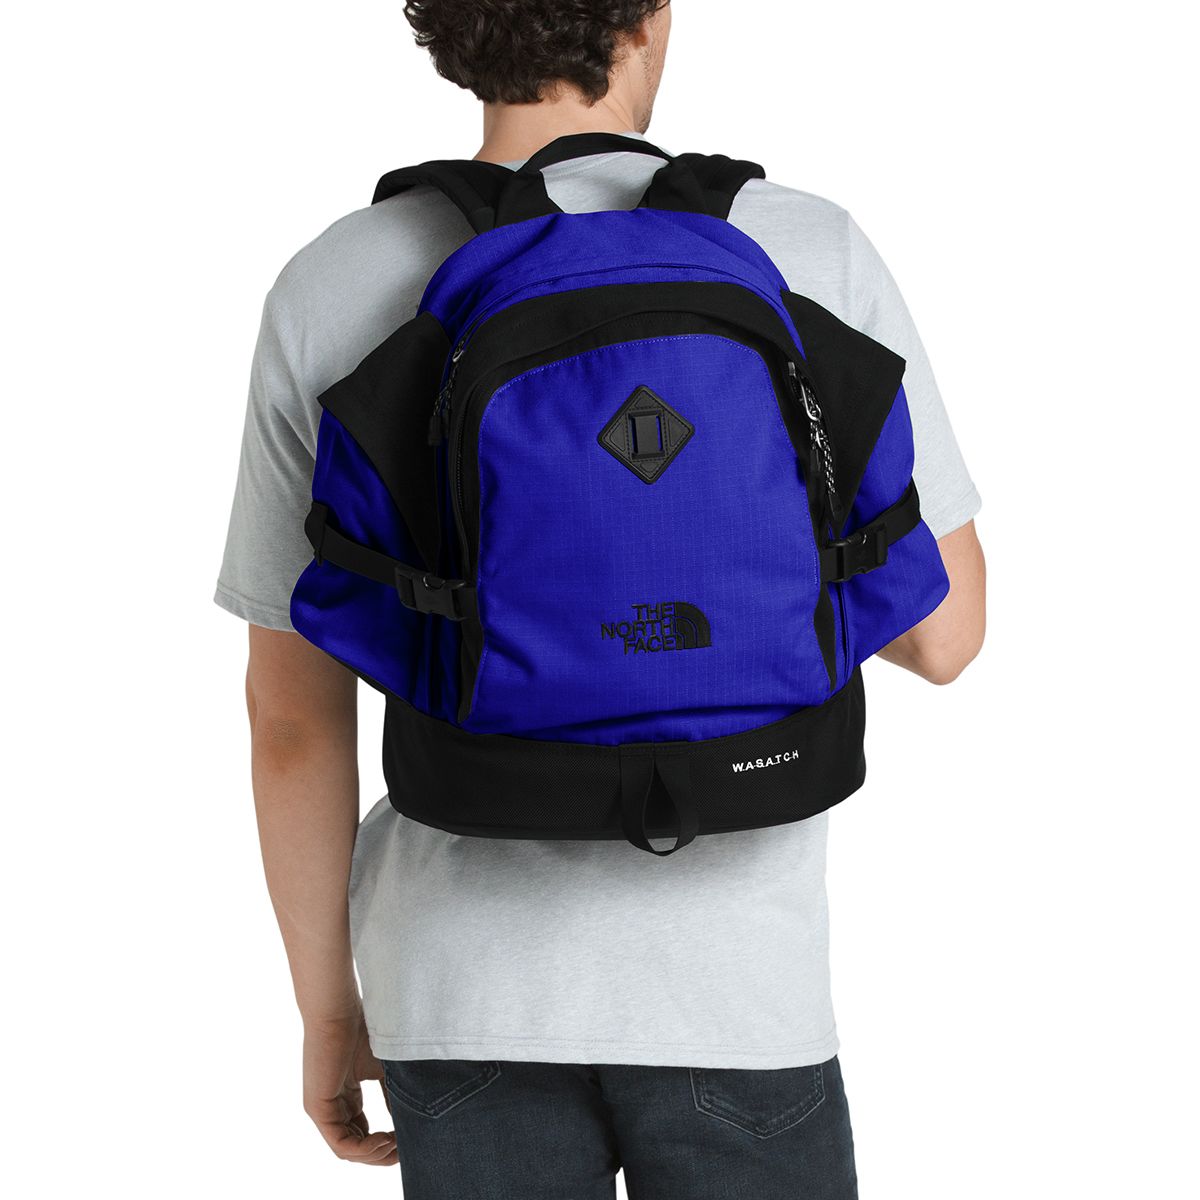 The North Face Wasatch Reissue 35L Daypack - Hike & Camp